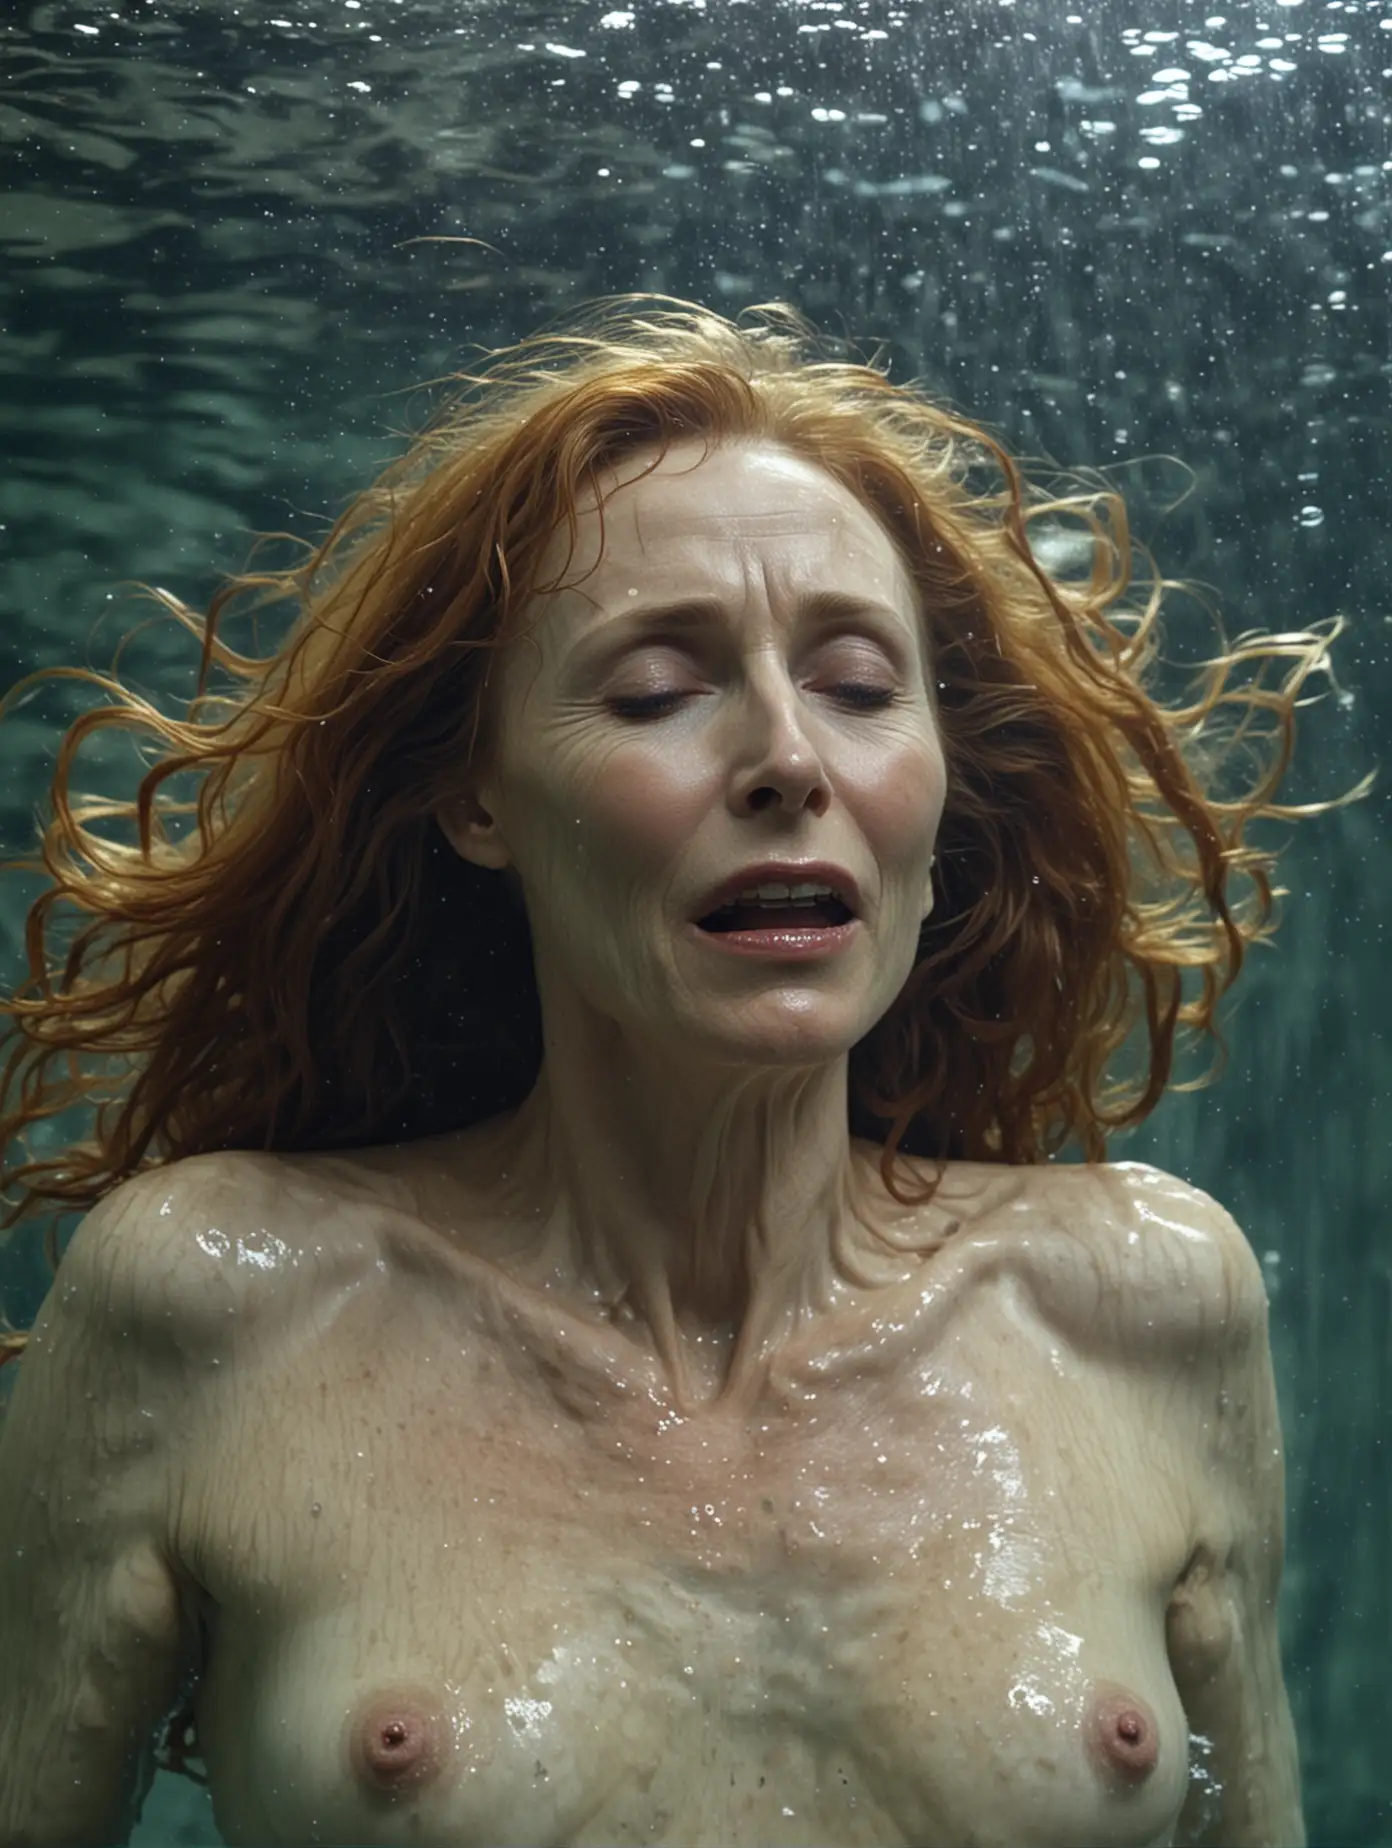 Gates McFadden, nude, under water, in pain, exhausted